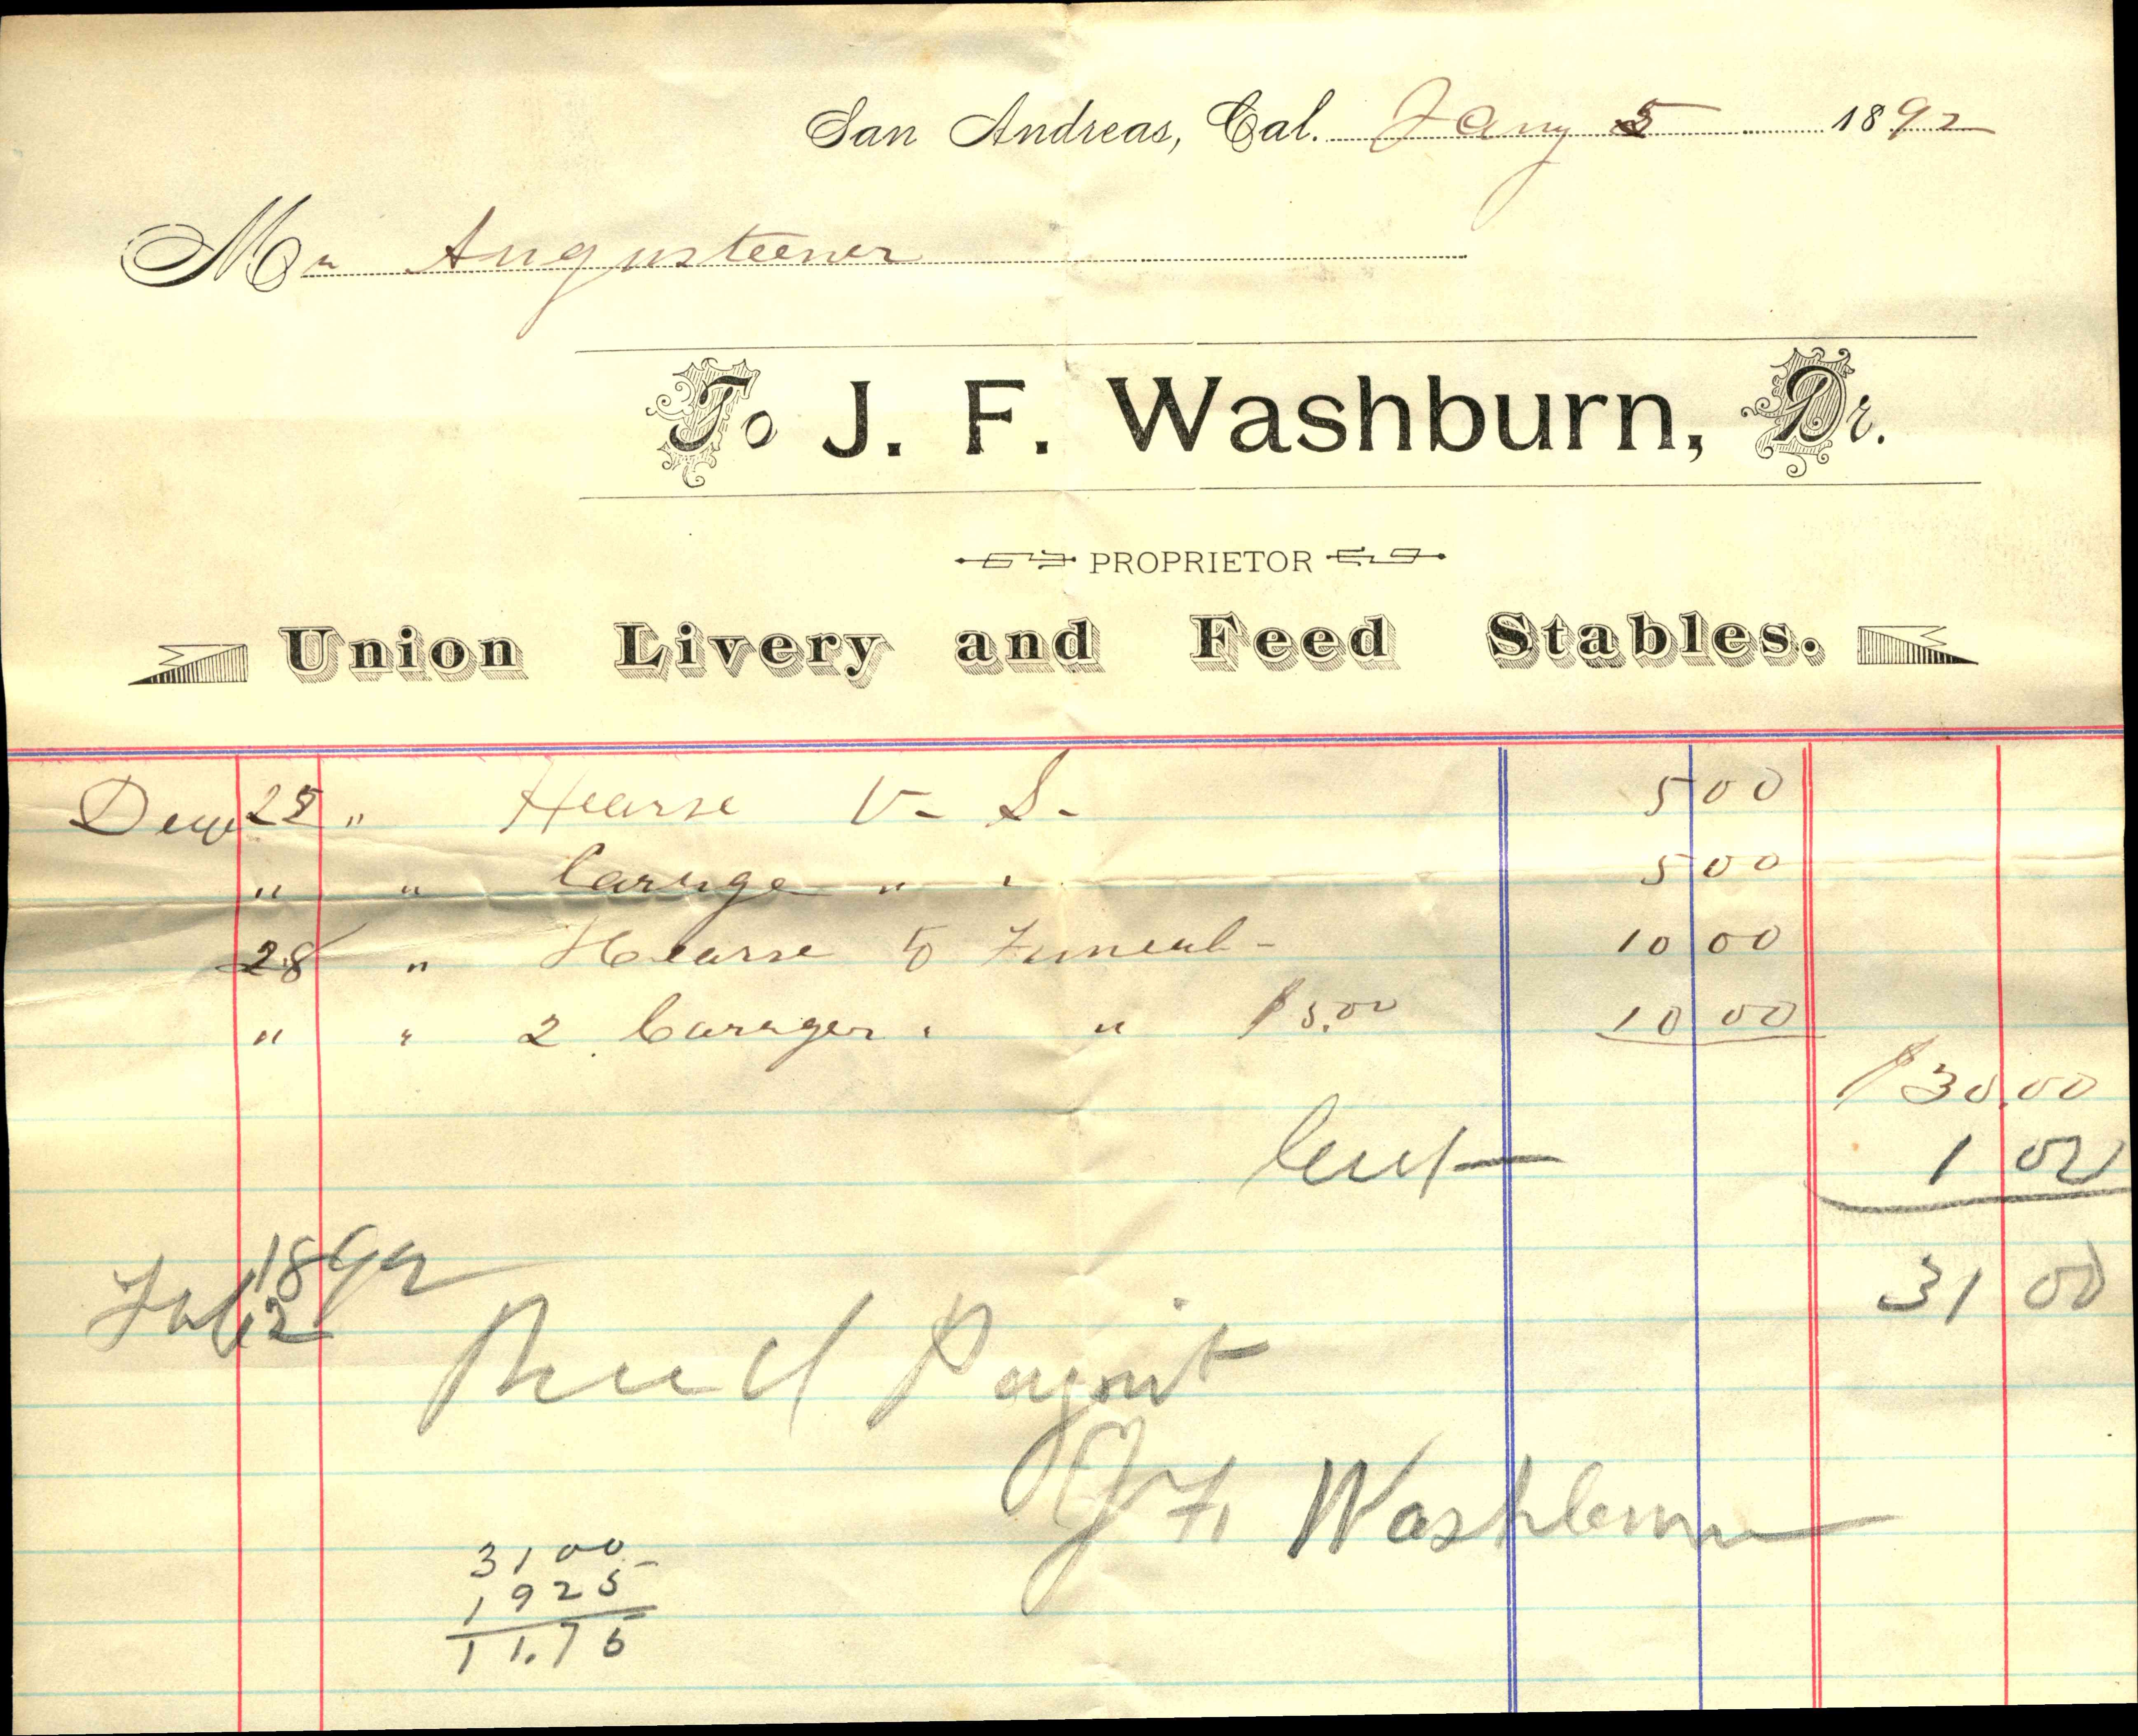 Receipt for union livery and feed stables